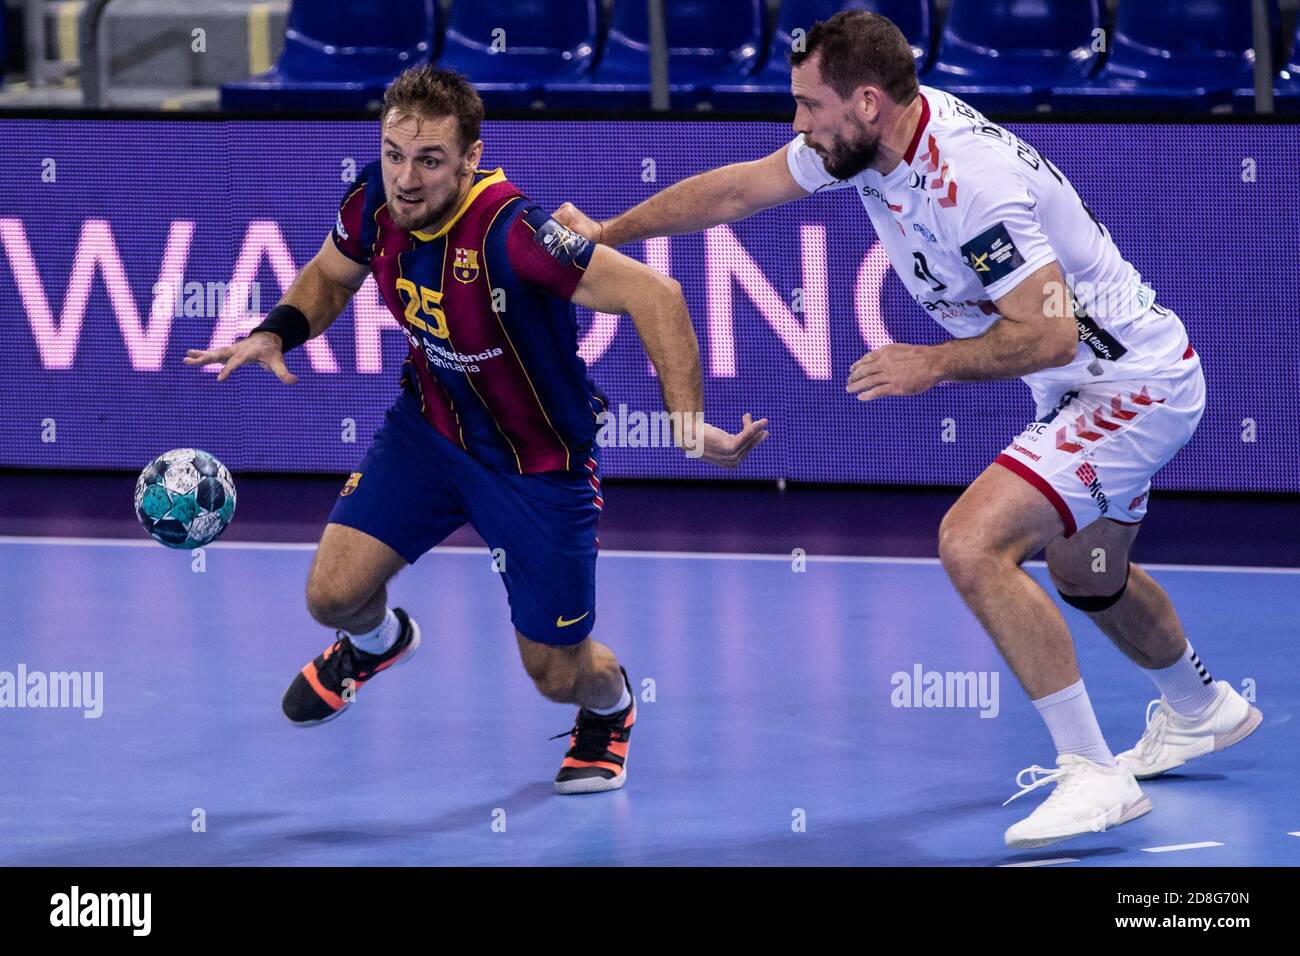 Luka Cindric of Fc Barcelona during the VELUX EHF Champions League handball  match between Fc Barcelona and Aalborg Handbold on October 29, 2020 at P C  Stock Photo - Alamy